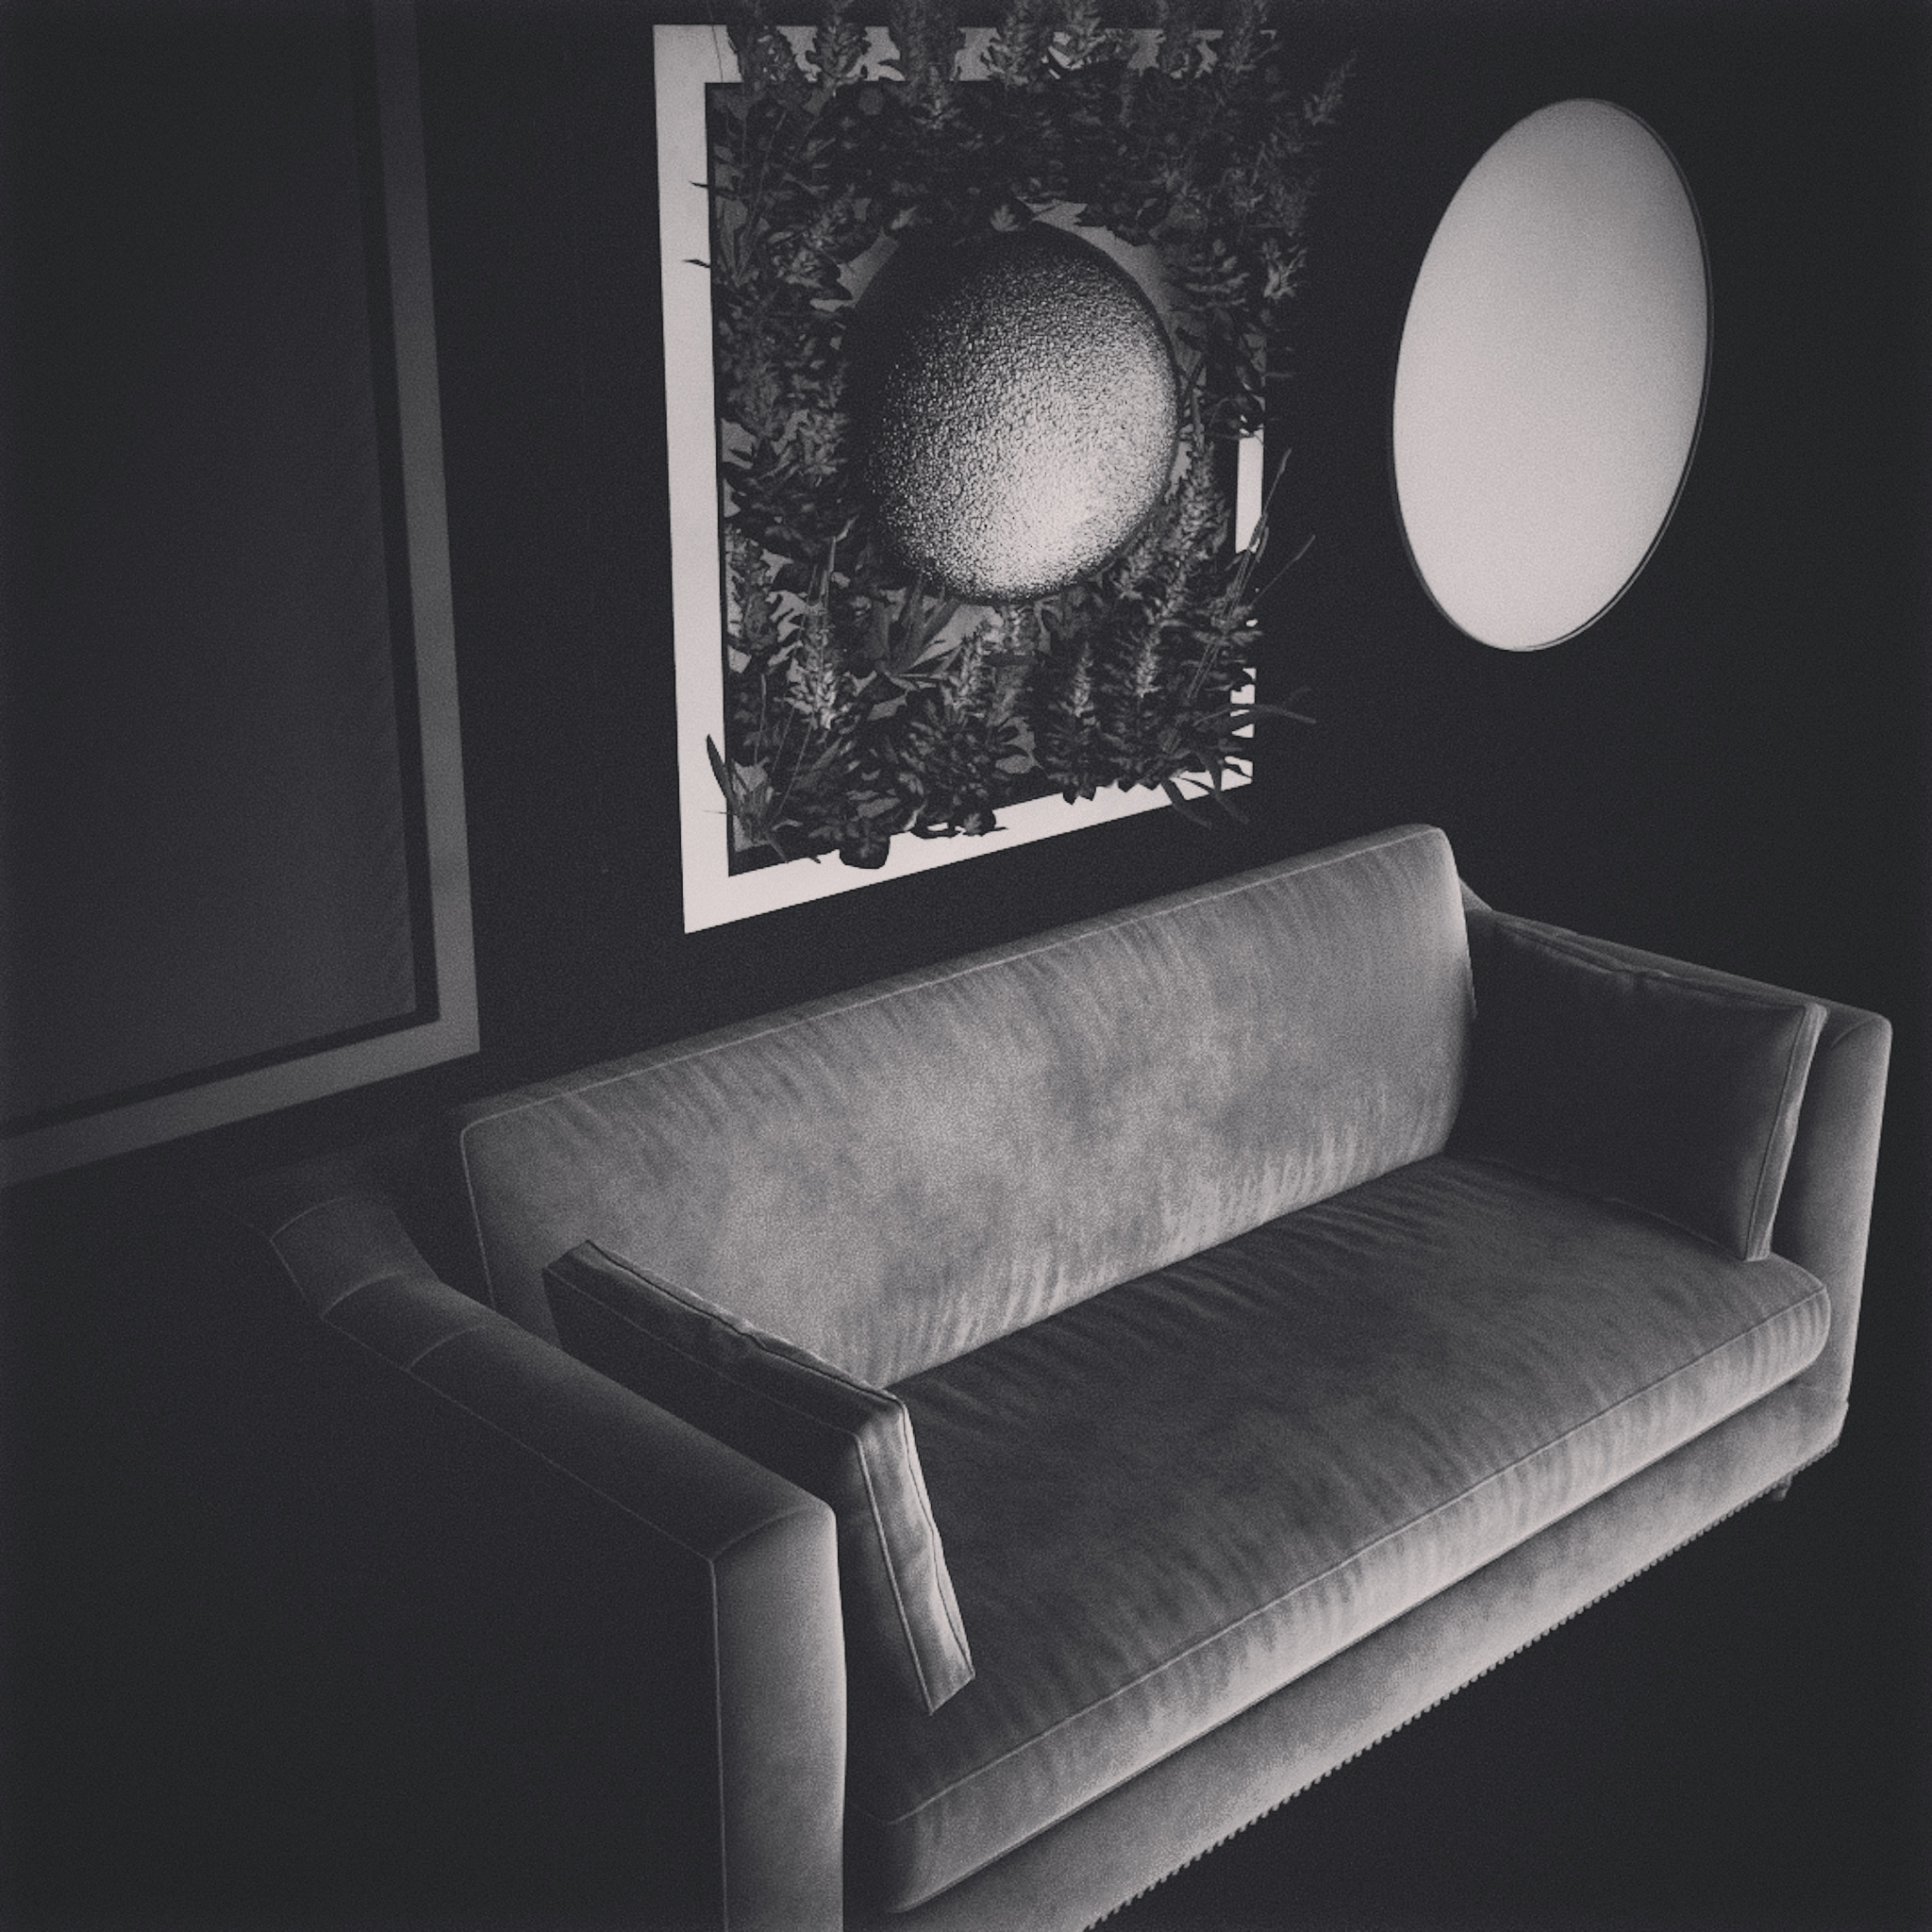 Couch (black and white)